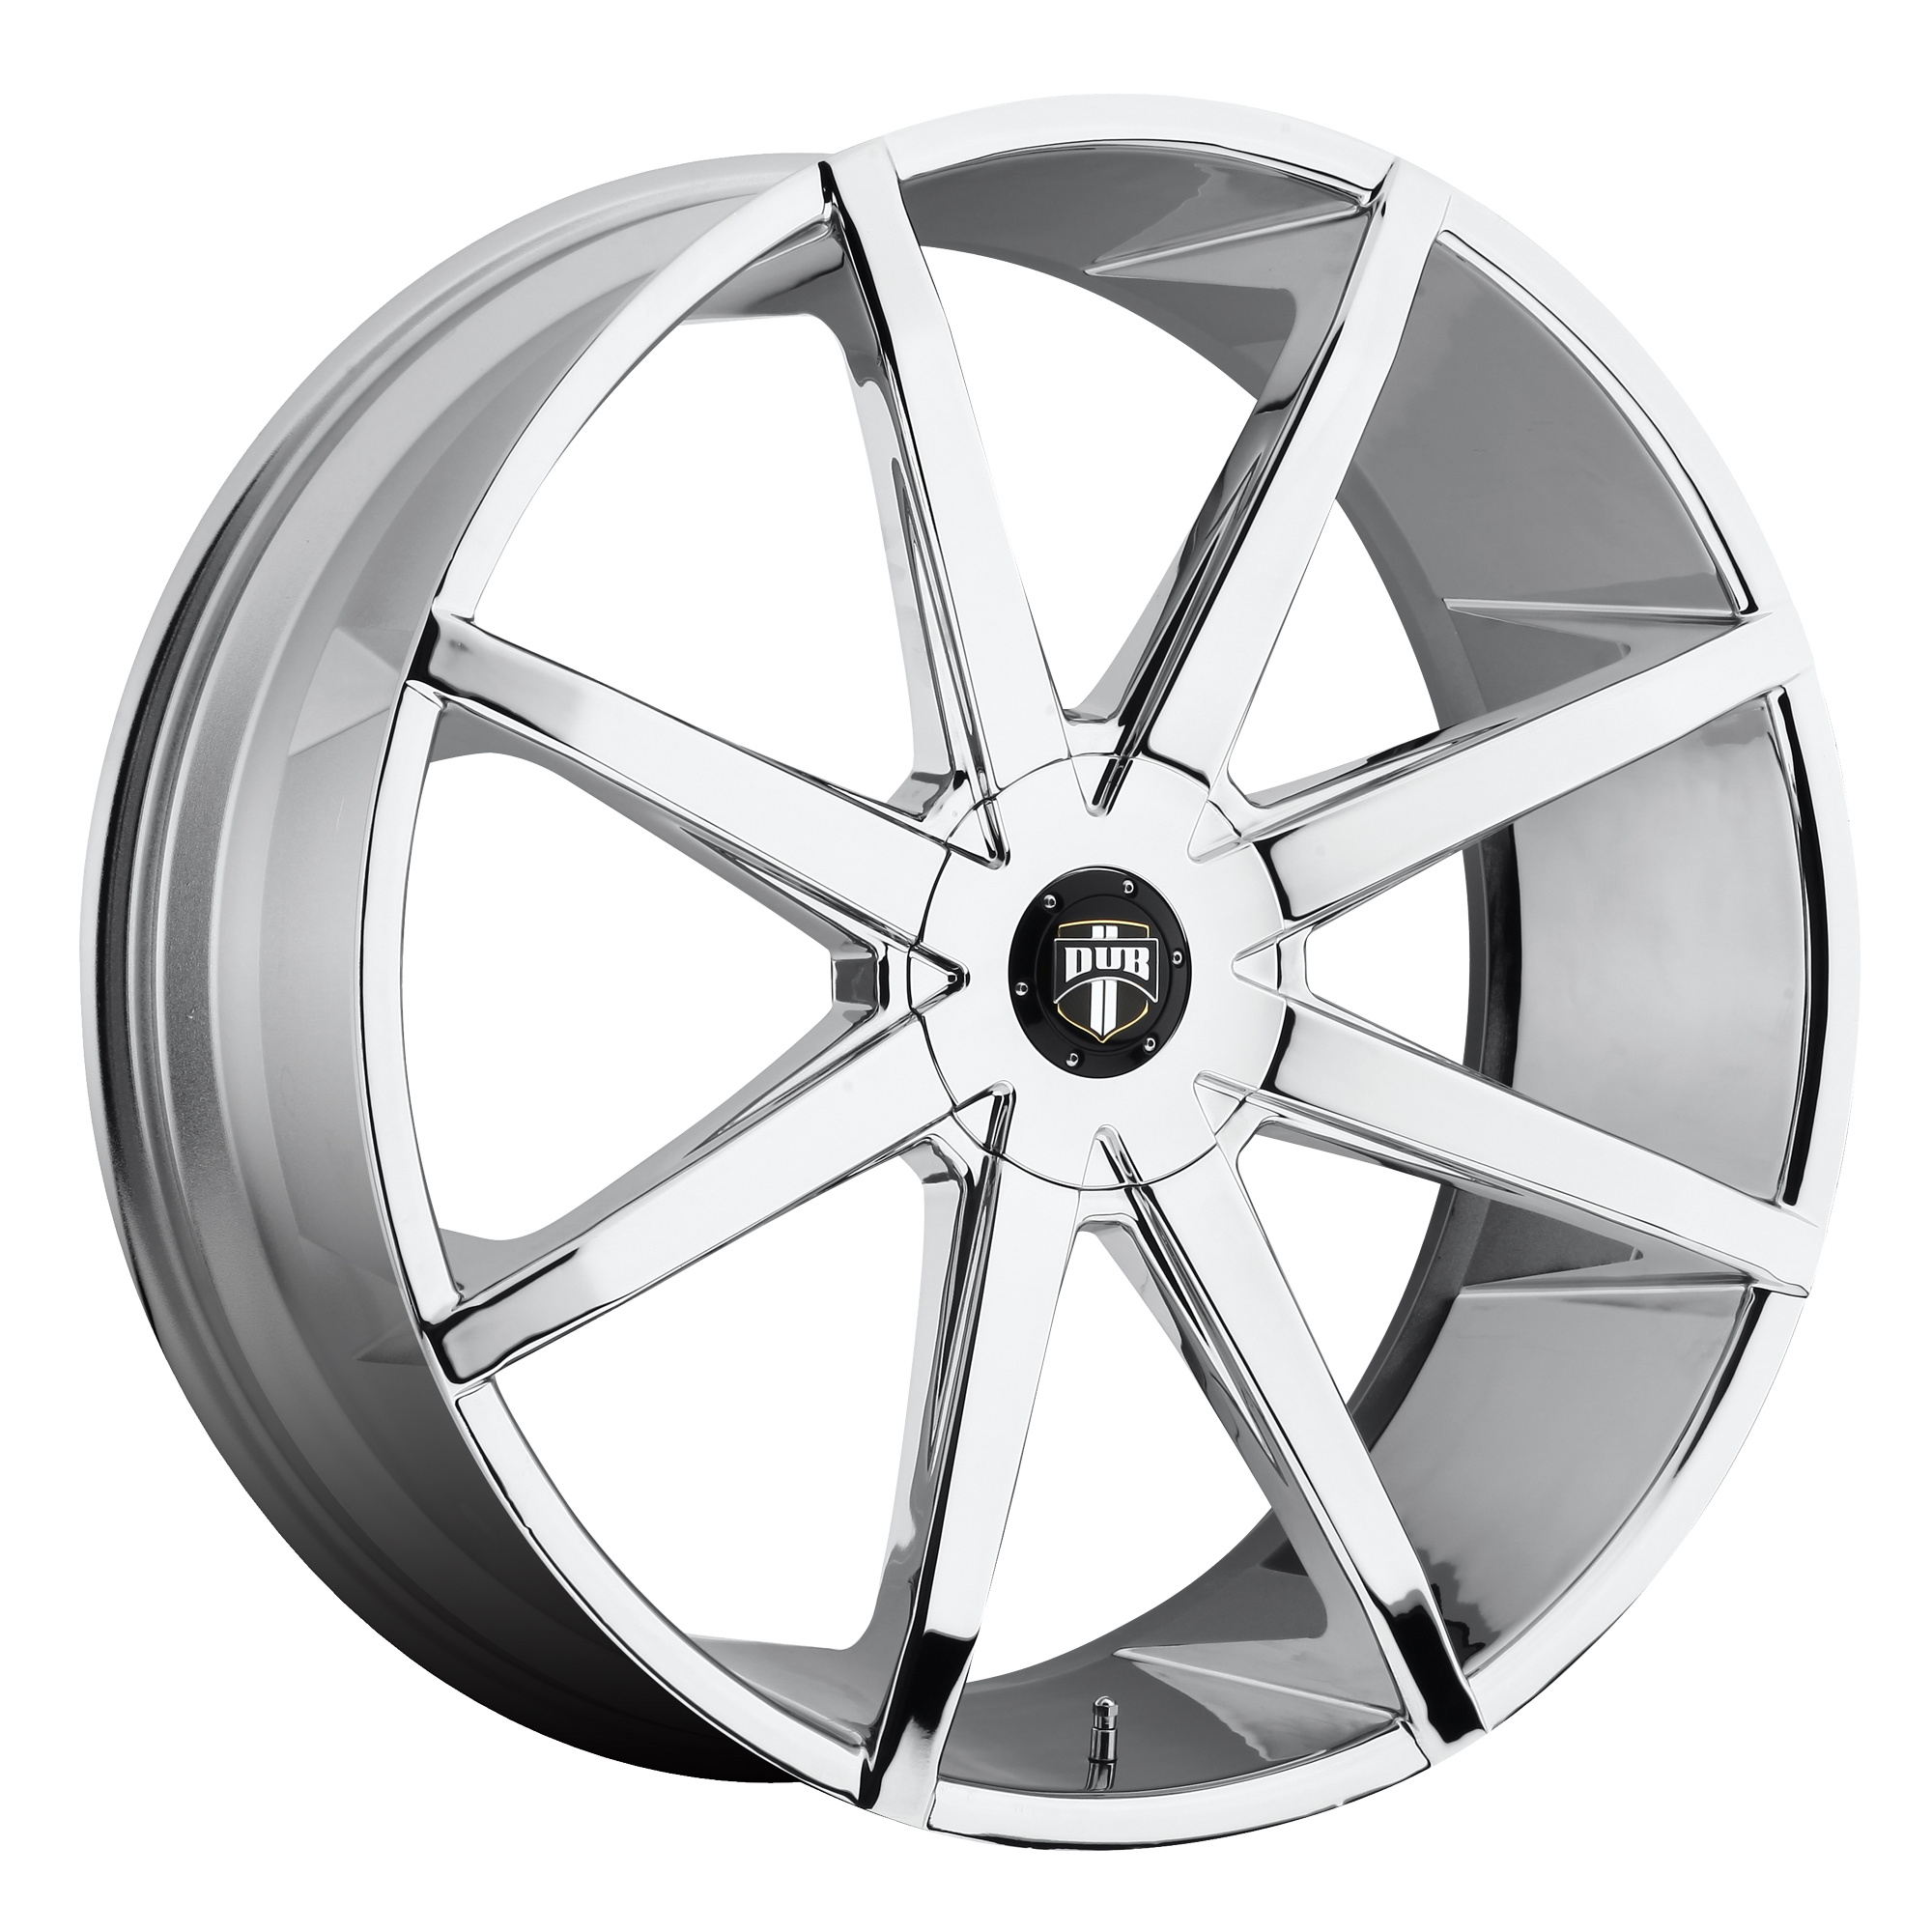 PUSH 22x9.5 6x135.00/6x139.70 CHROME PLATED (25 mm) - Tires and Engine Performance